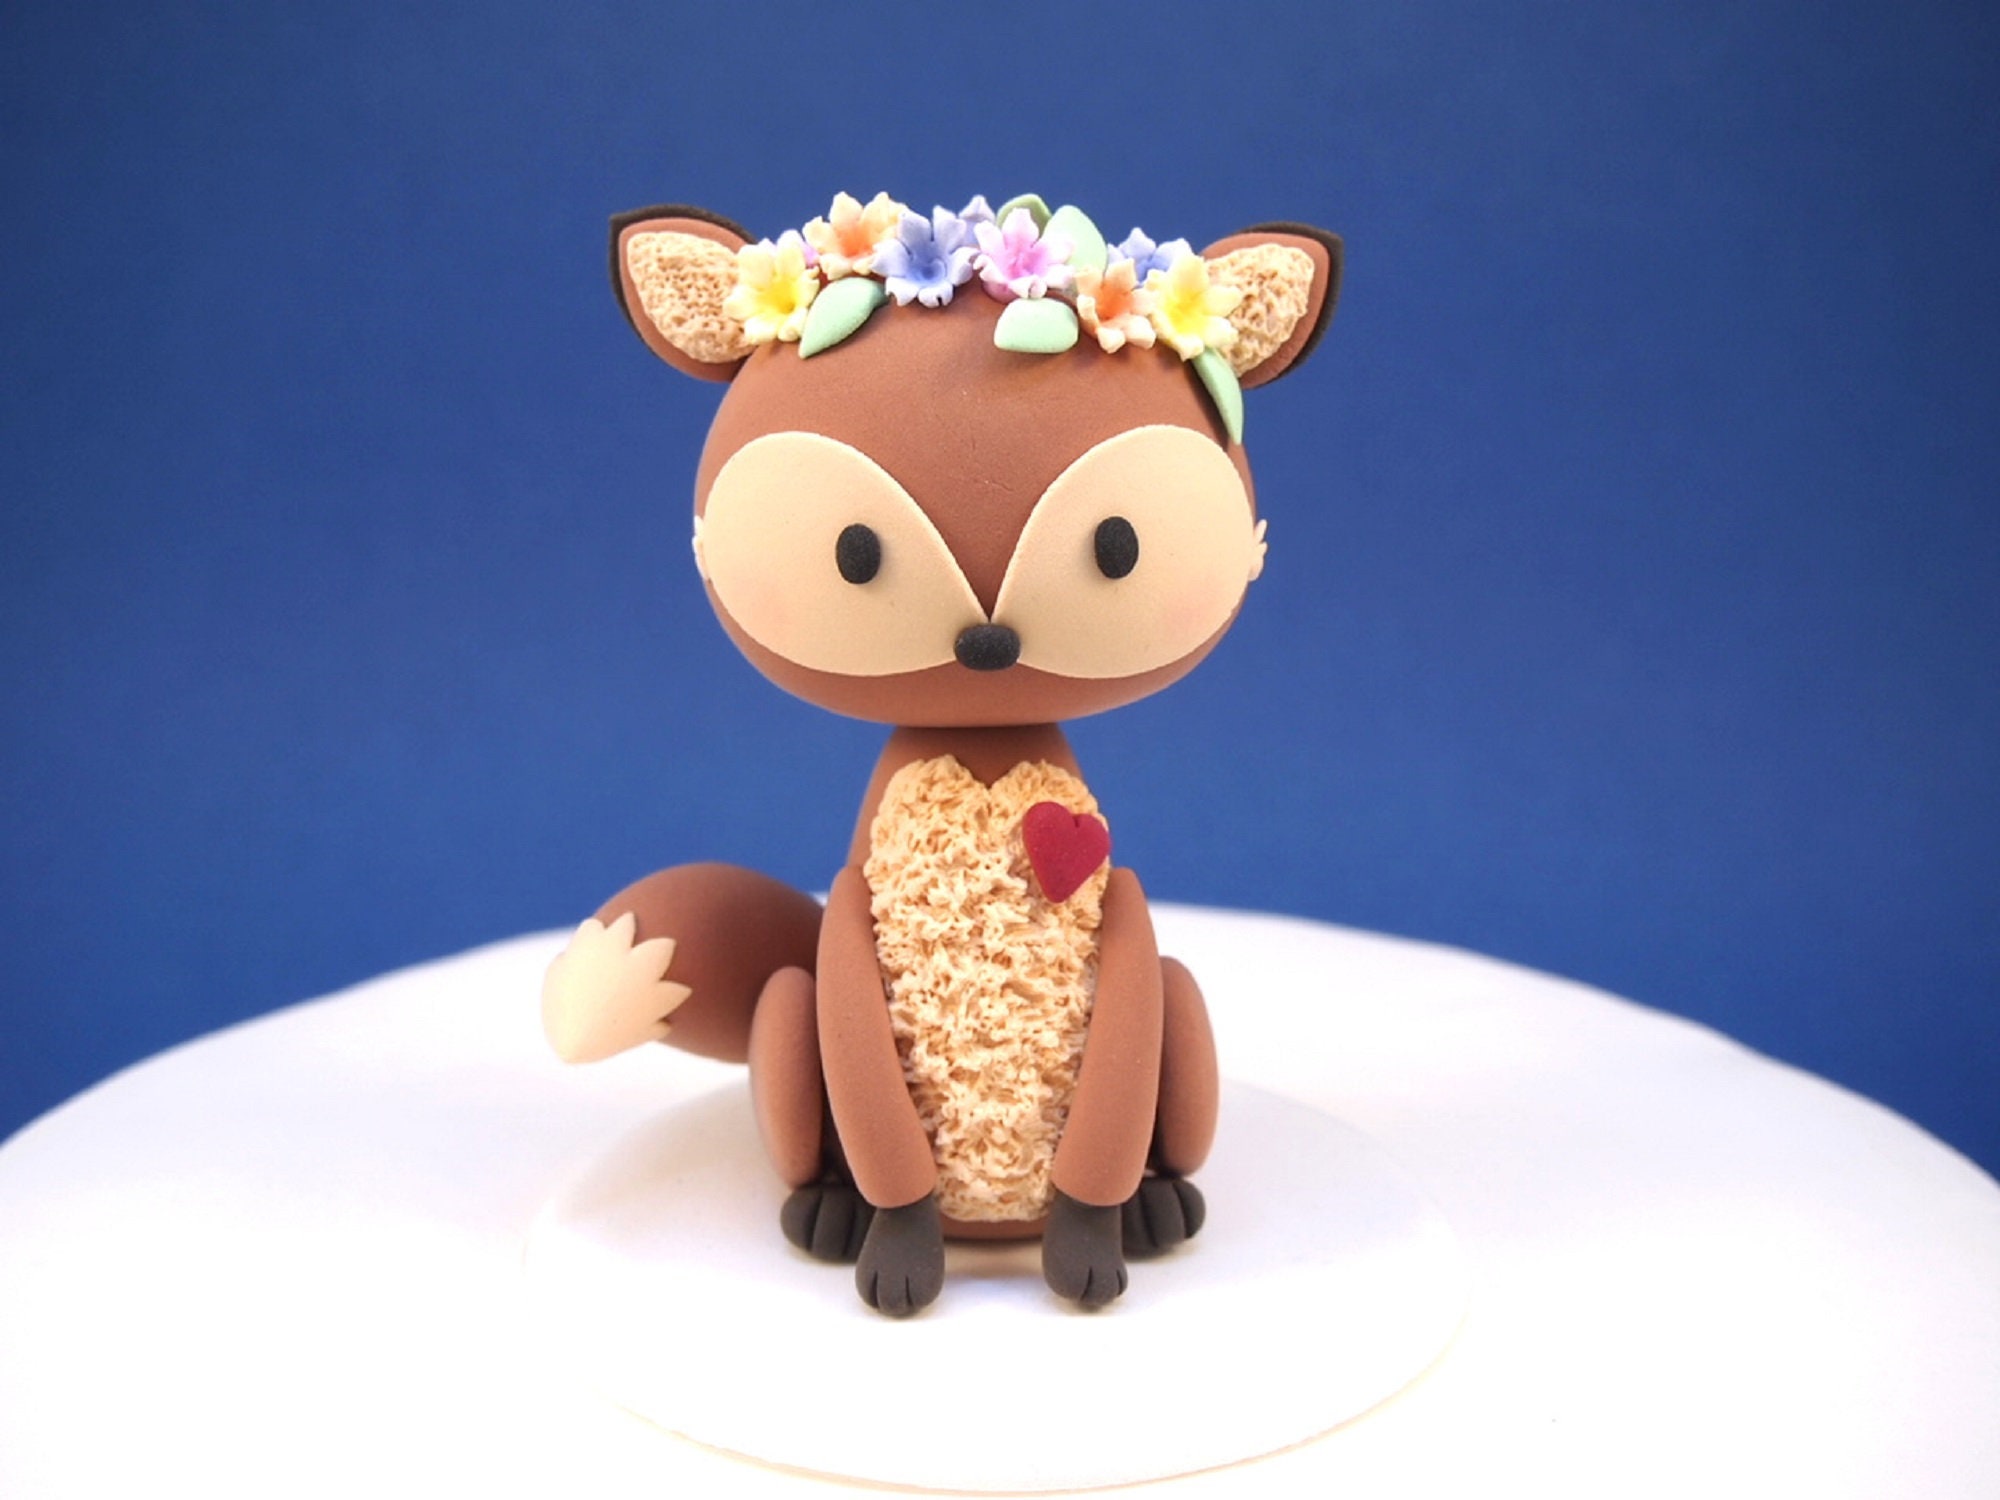 The Woodland Fox Fondant Cake Topper - Celebration Cakes & Toppers